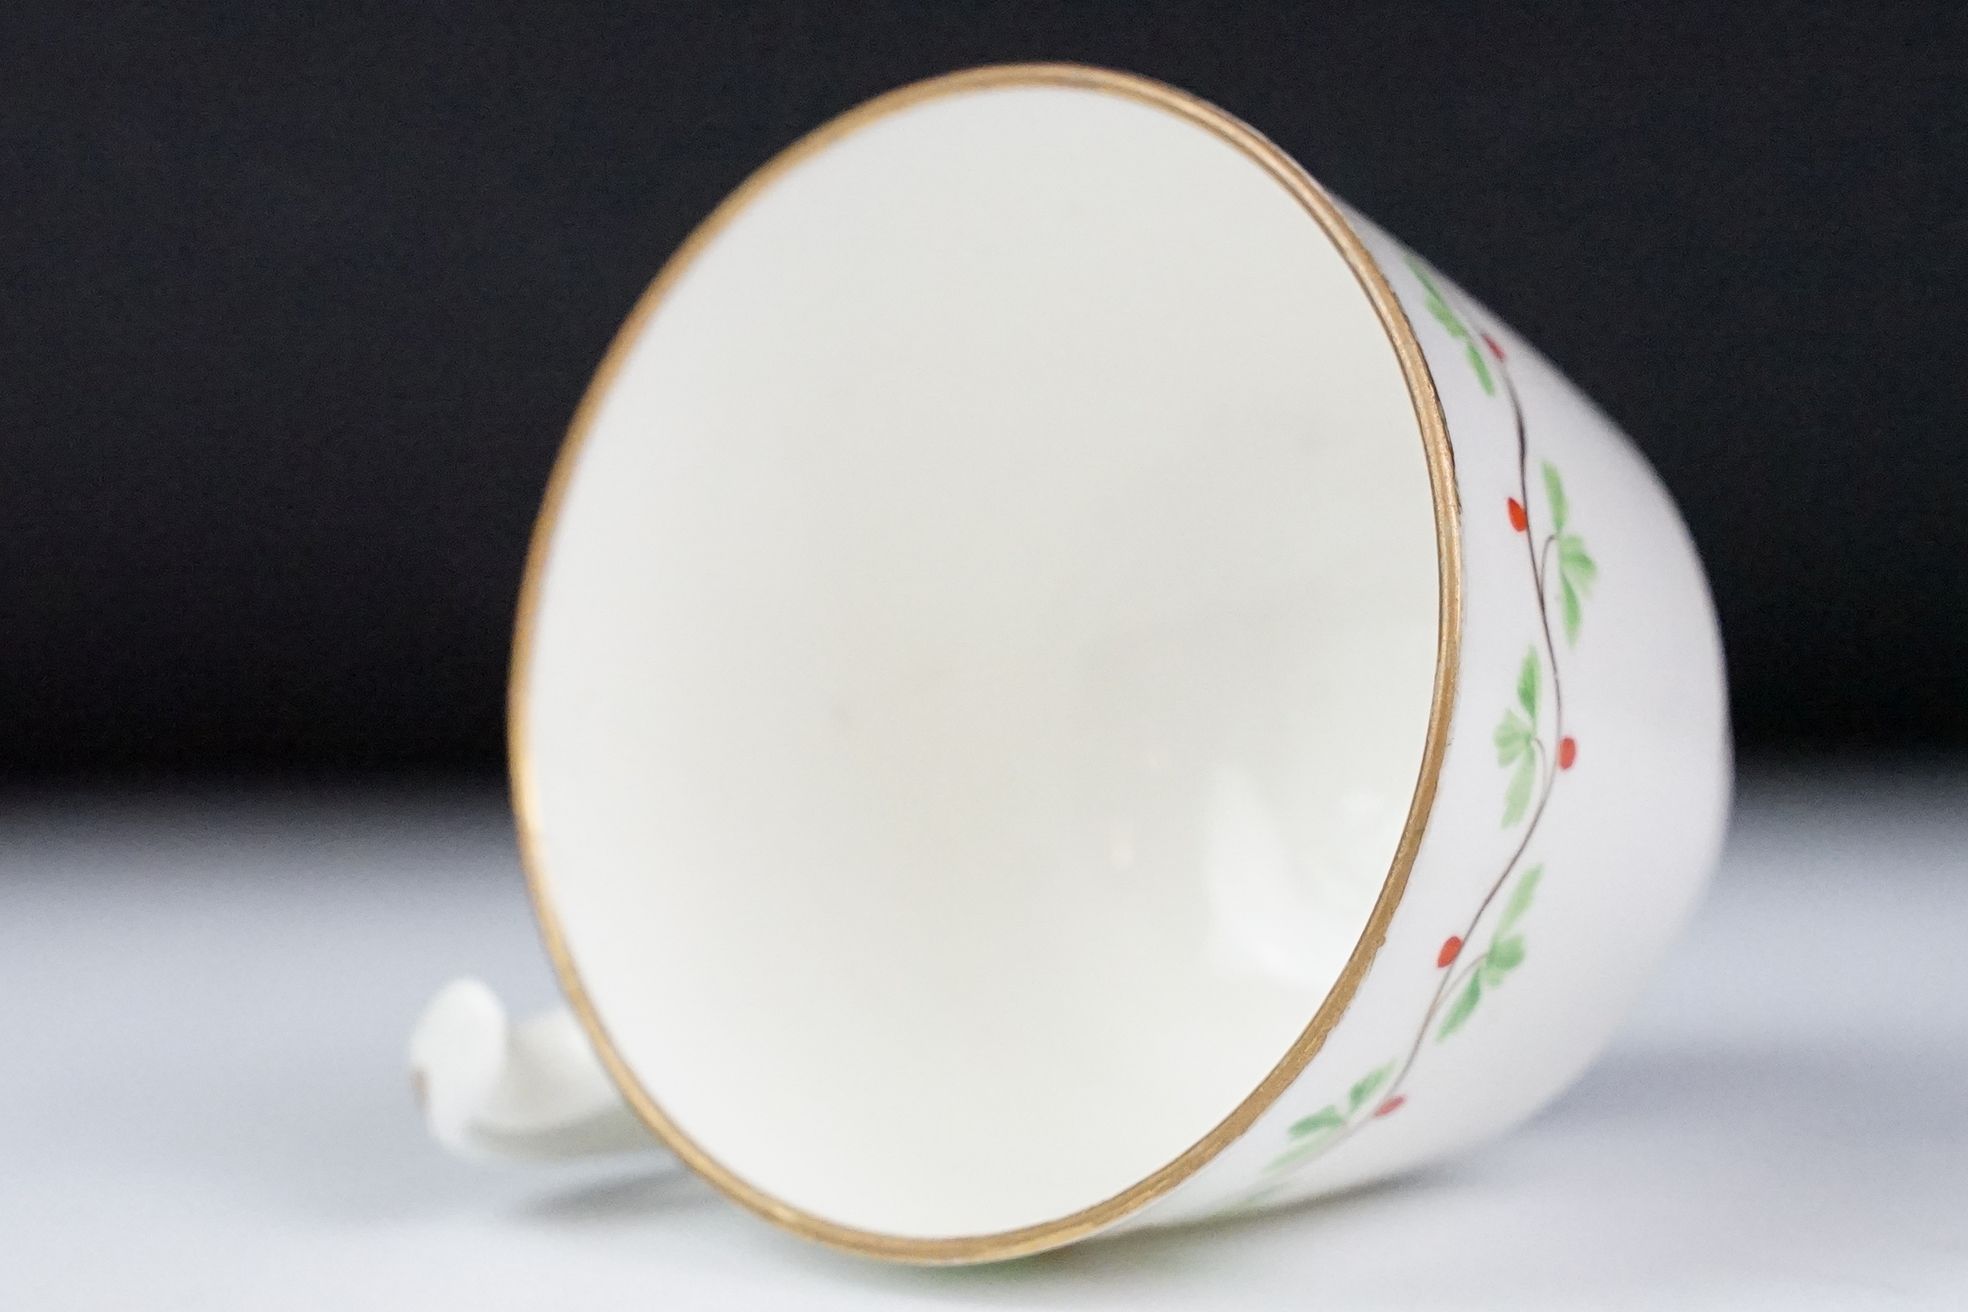 Swansea pottery cup and saucer, hand painted with a floral garland, the saucer, 13.5cm diameter - Image 4 of 7